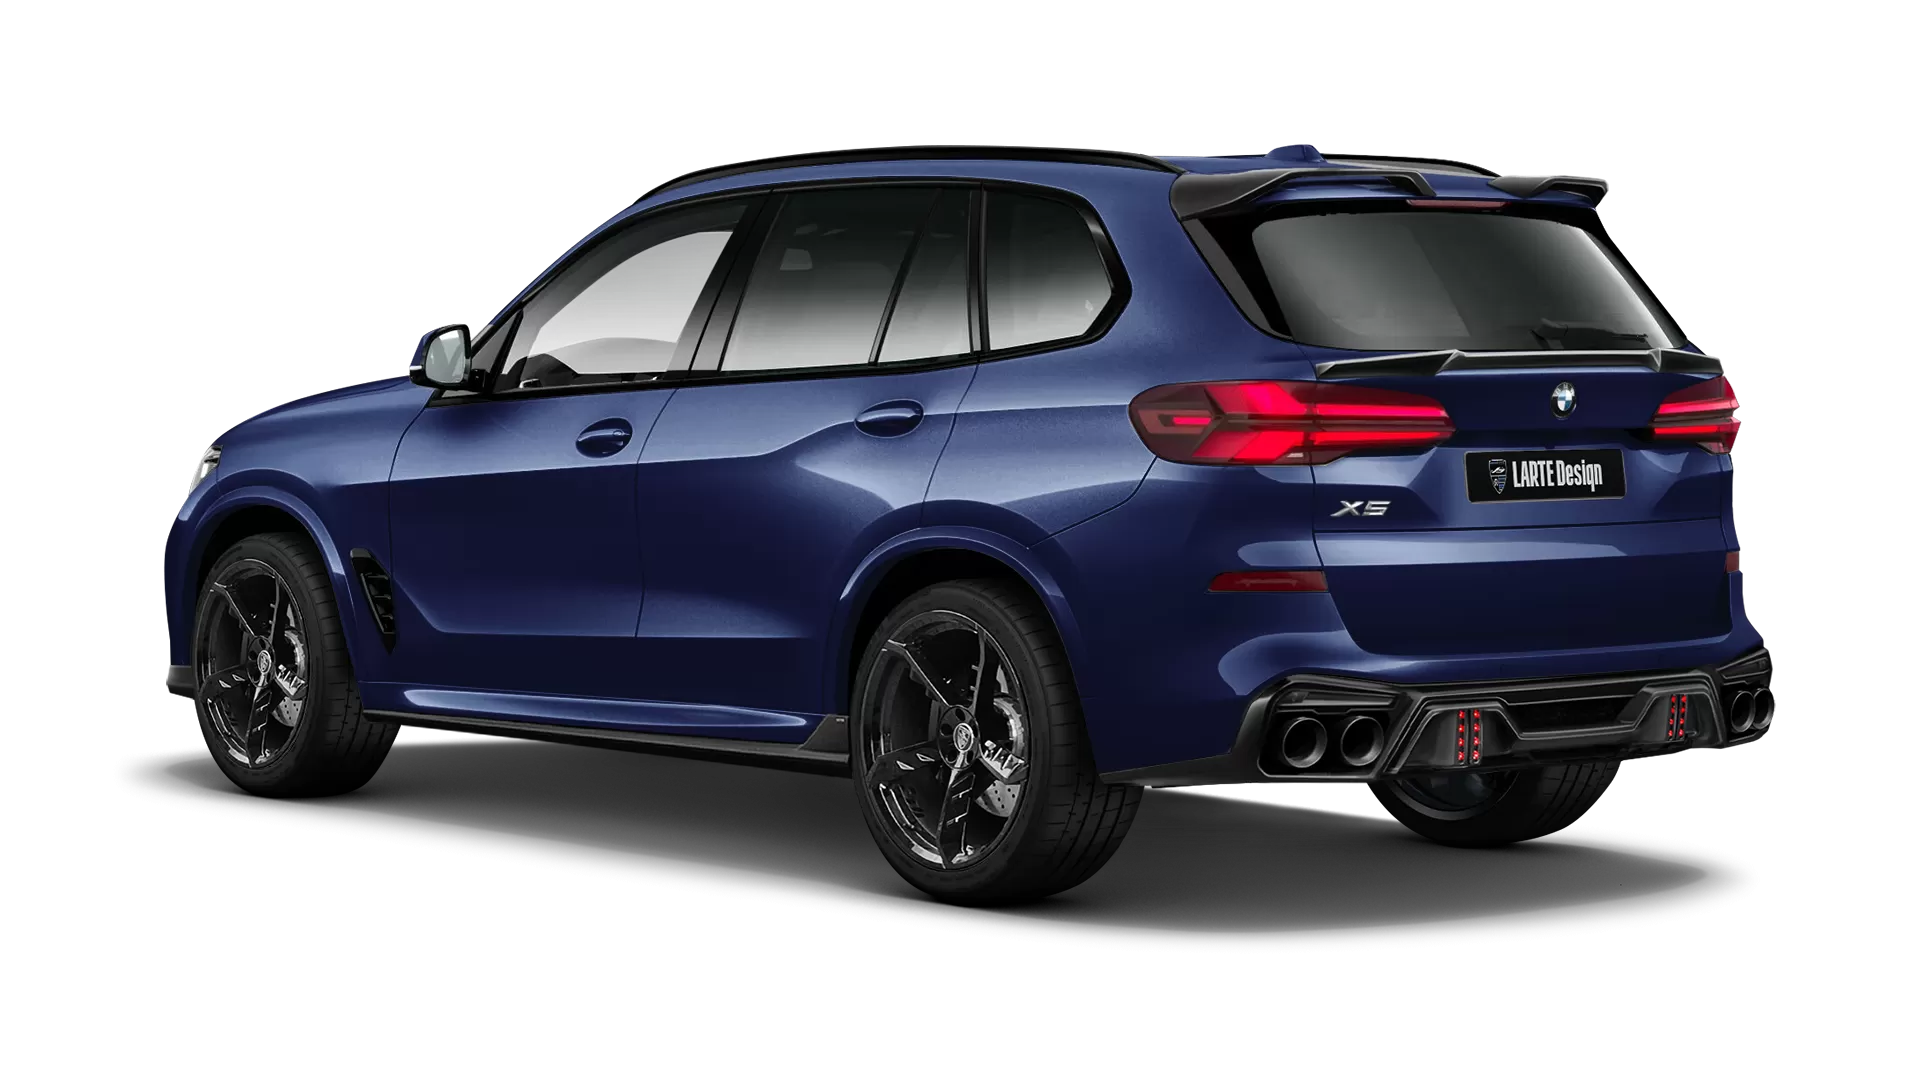 BMW X5 G05 LCI Facelift with painted body kit: rear view shown in Tanzanite Blue